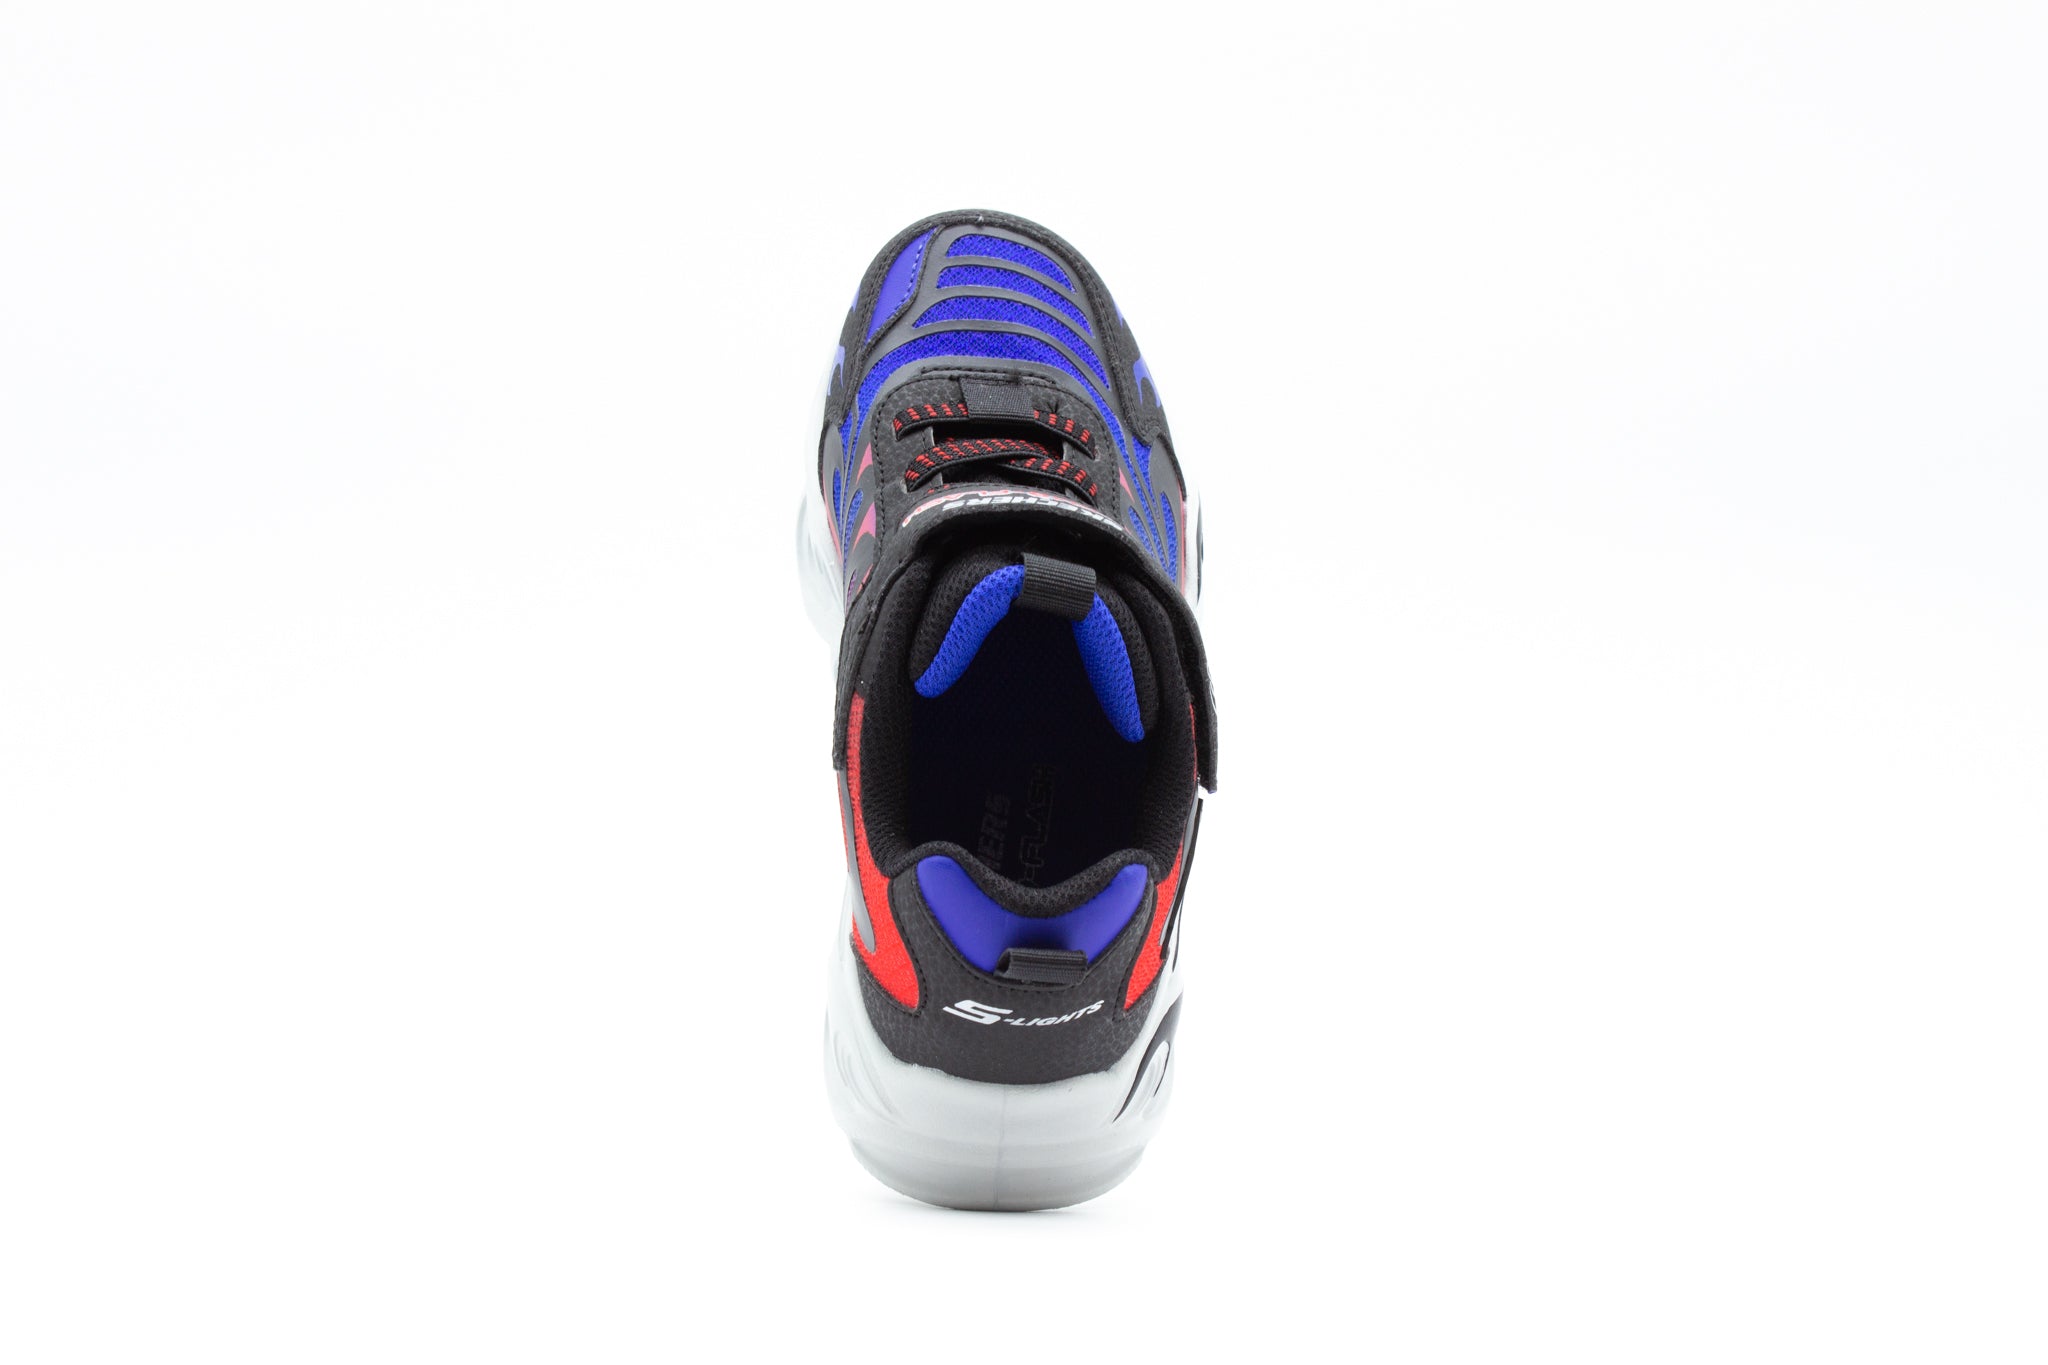 Skechers S Lights: Thermo-Flash